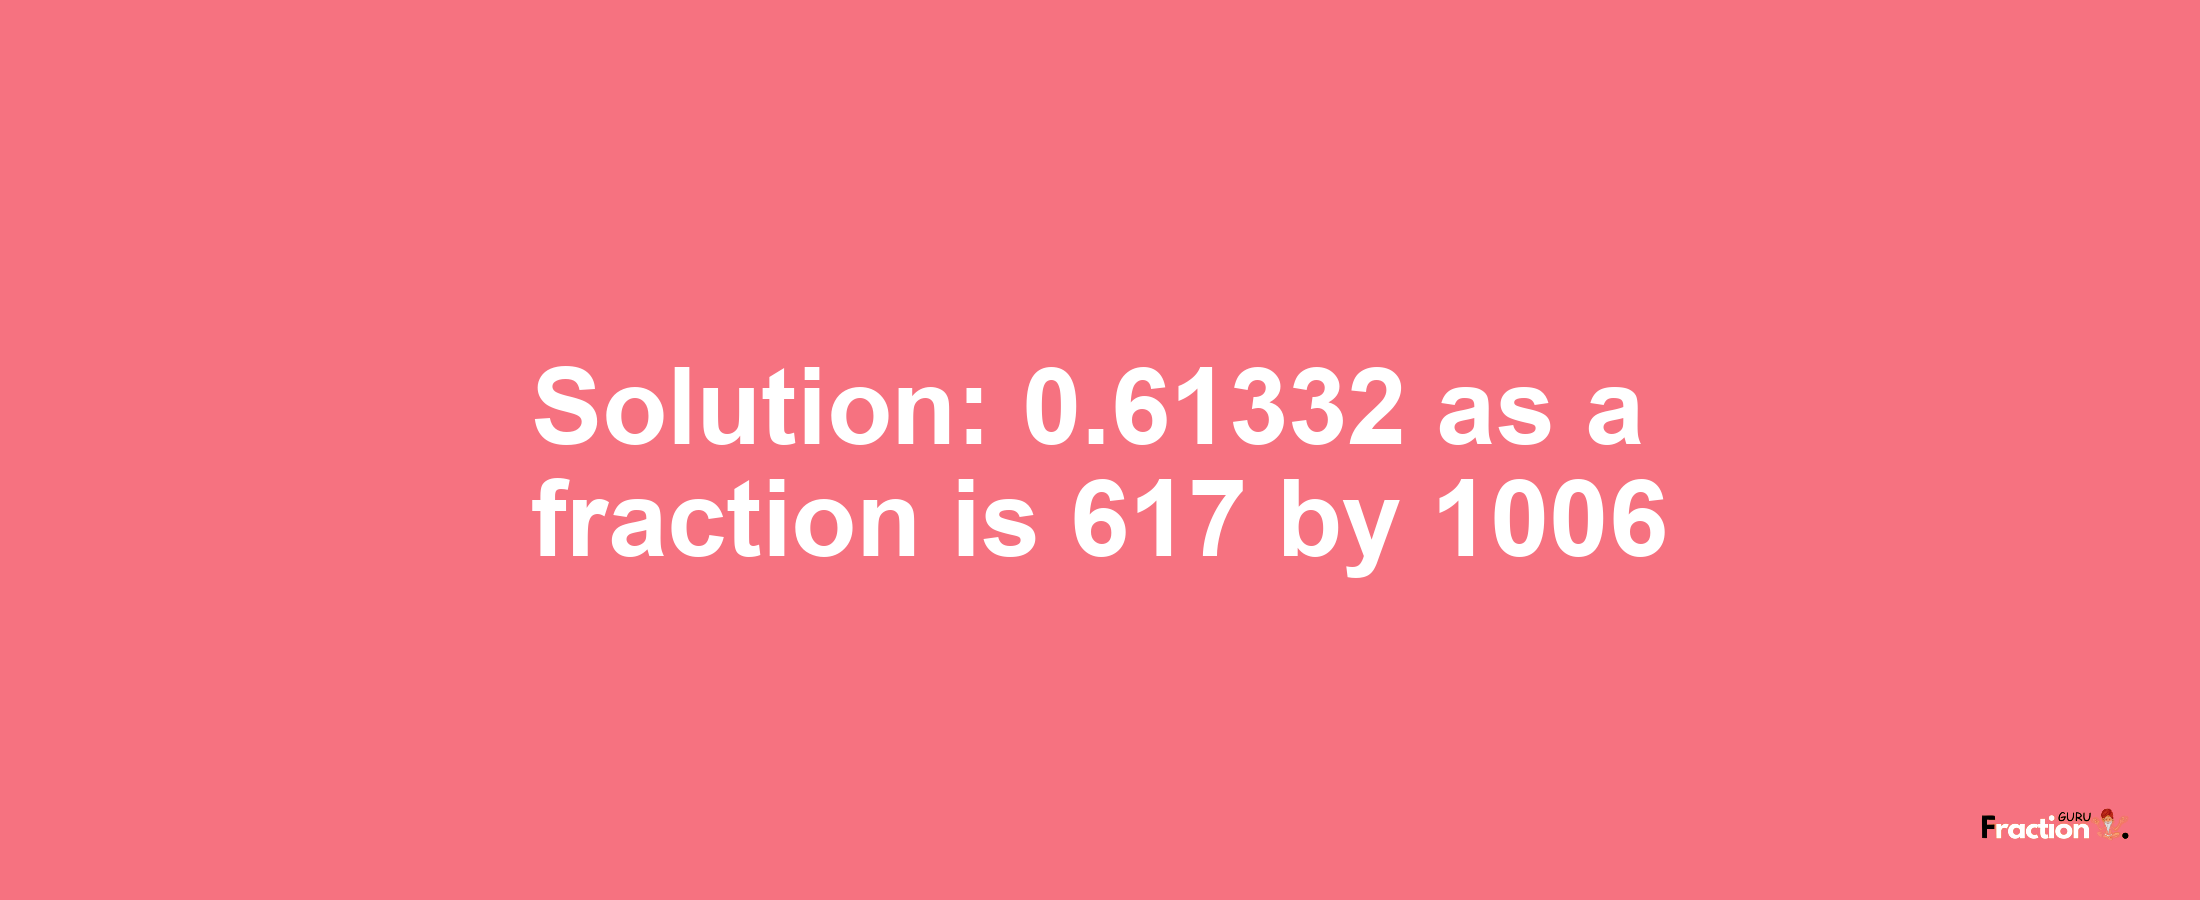 Solution:0.61332 as a fraction is 617/1006